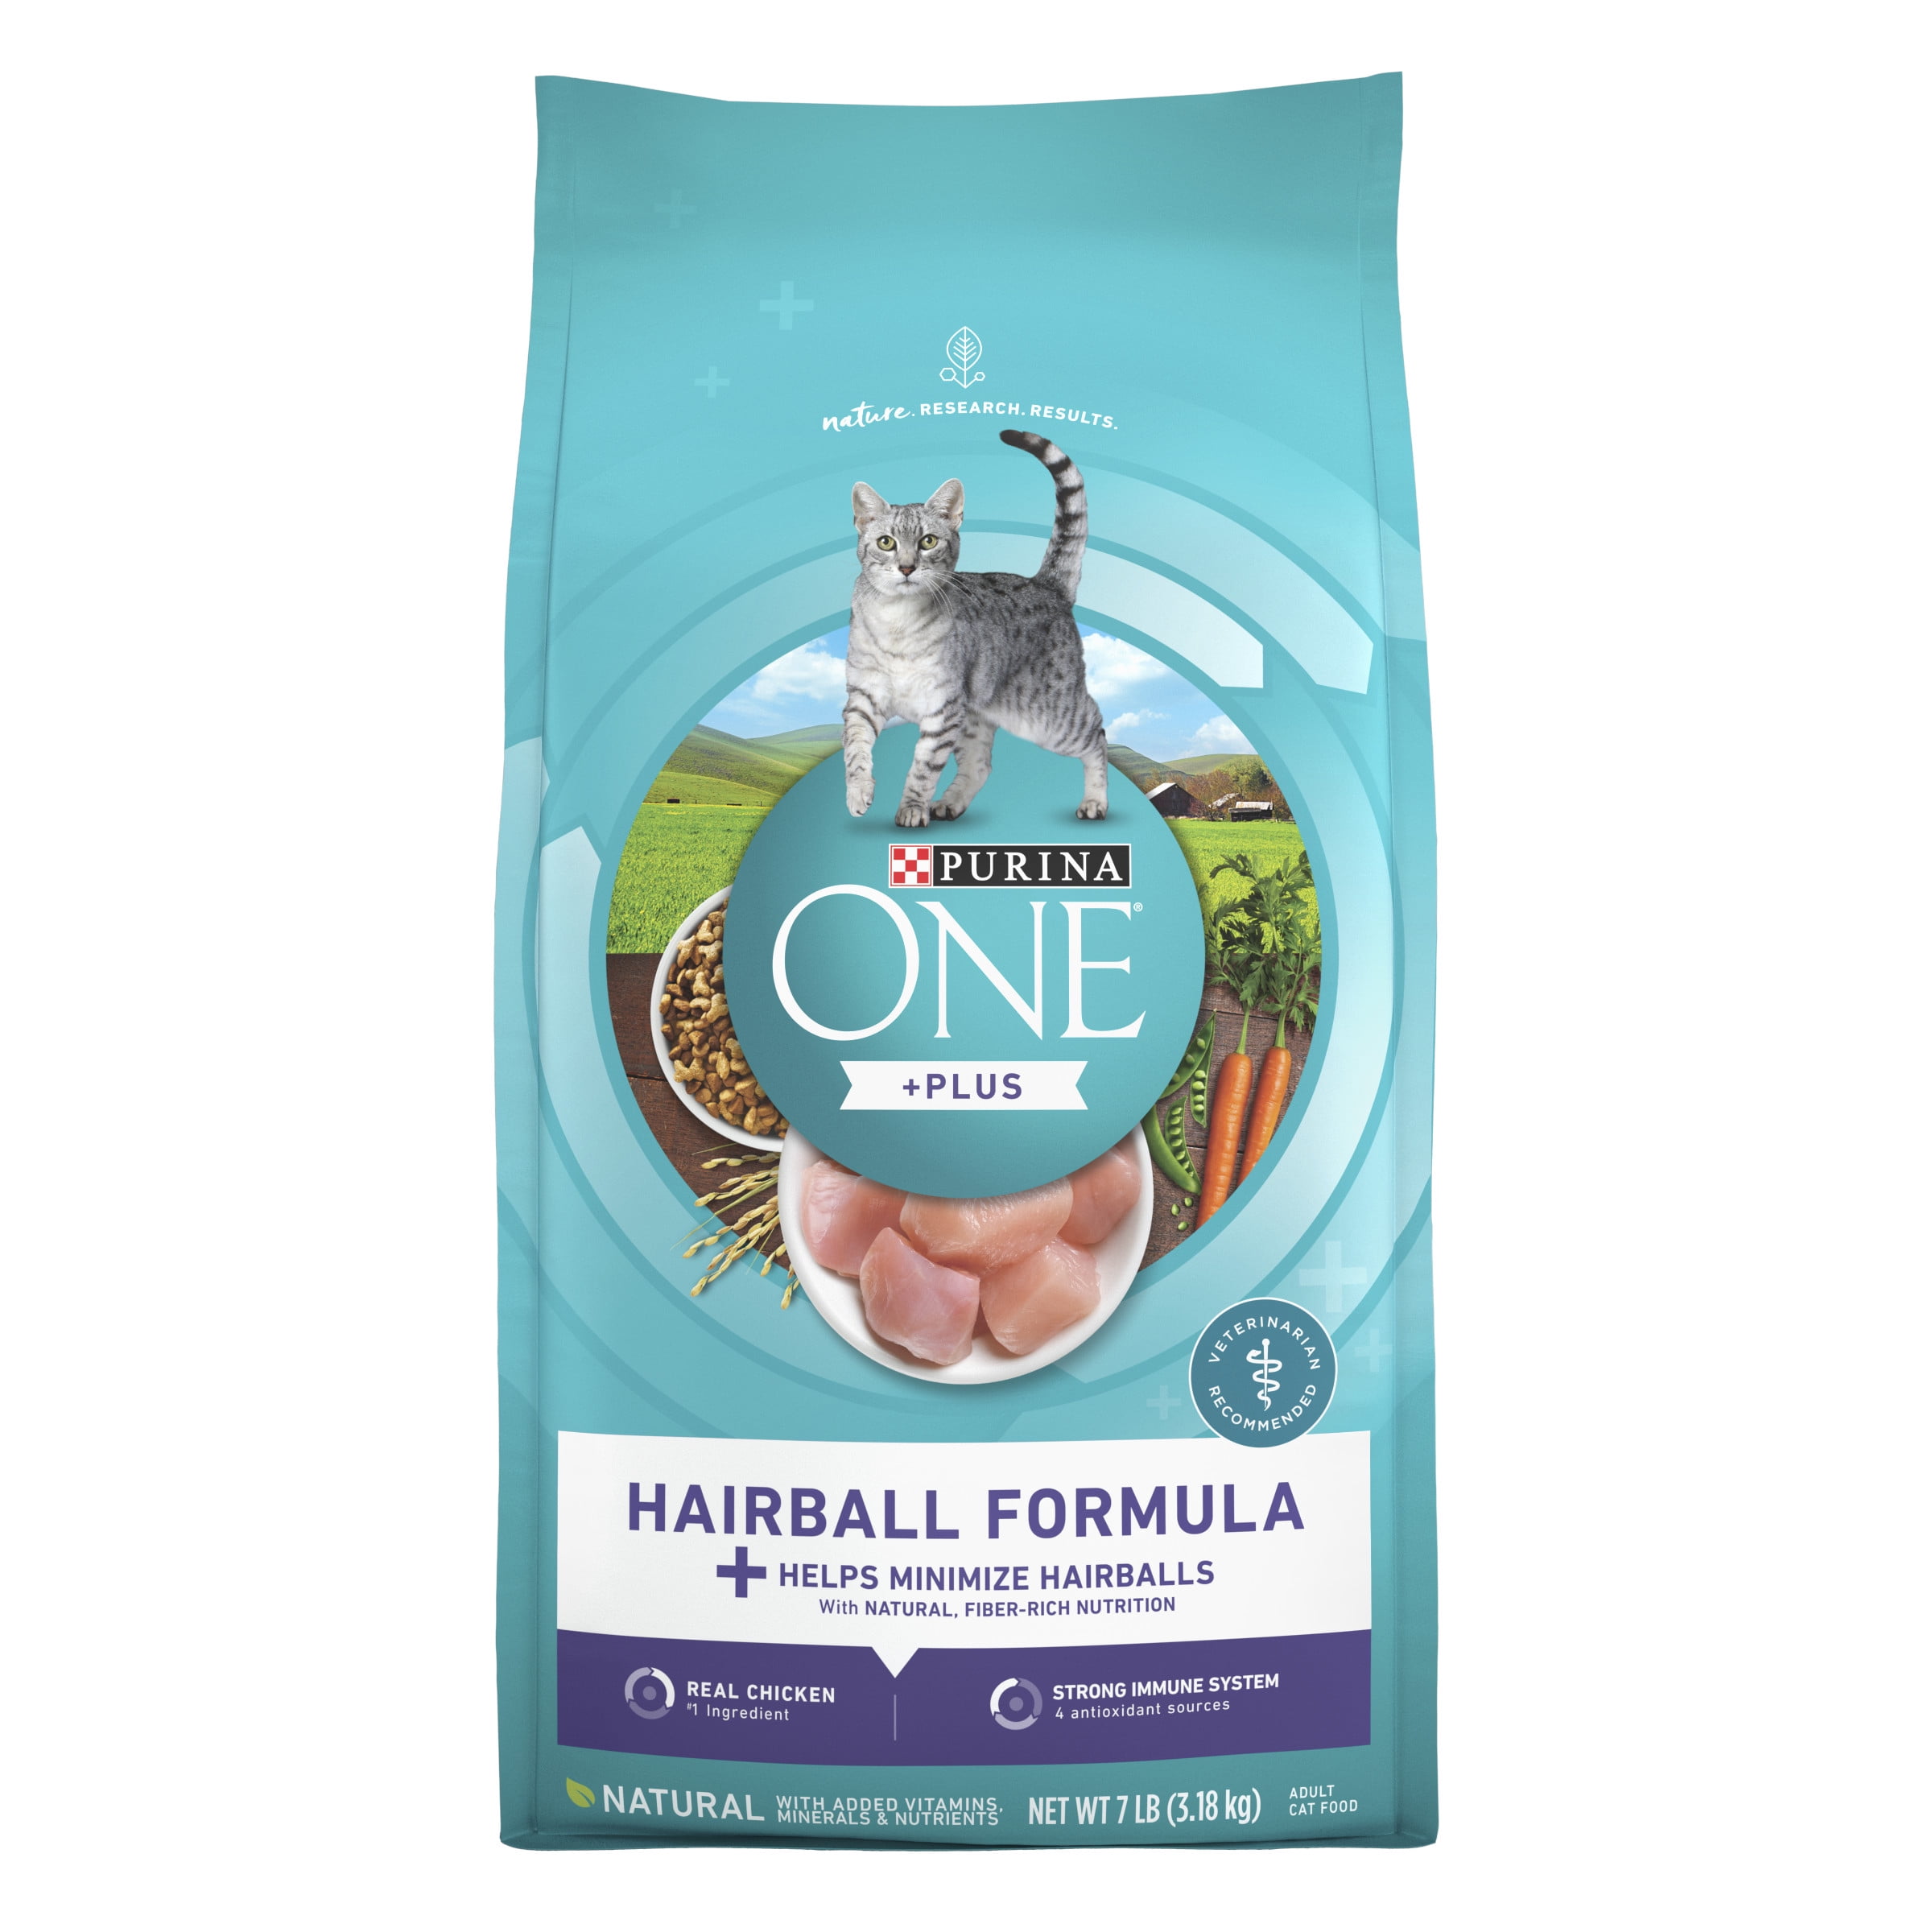 Purina One +Plus Hairball Formula Nutural and Fiber Nutrition Dry Cat Food, 7 lb Bag